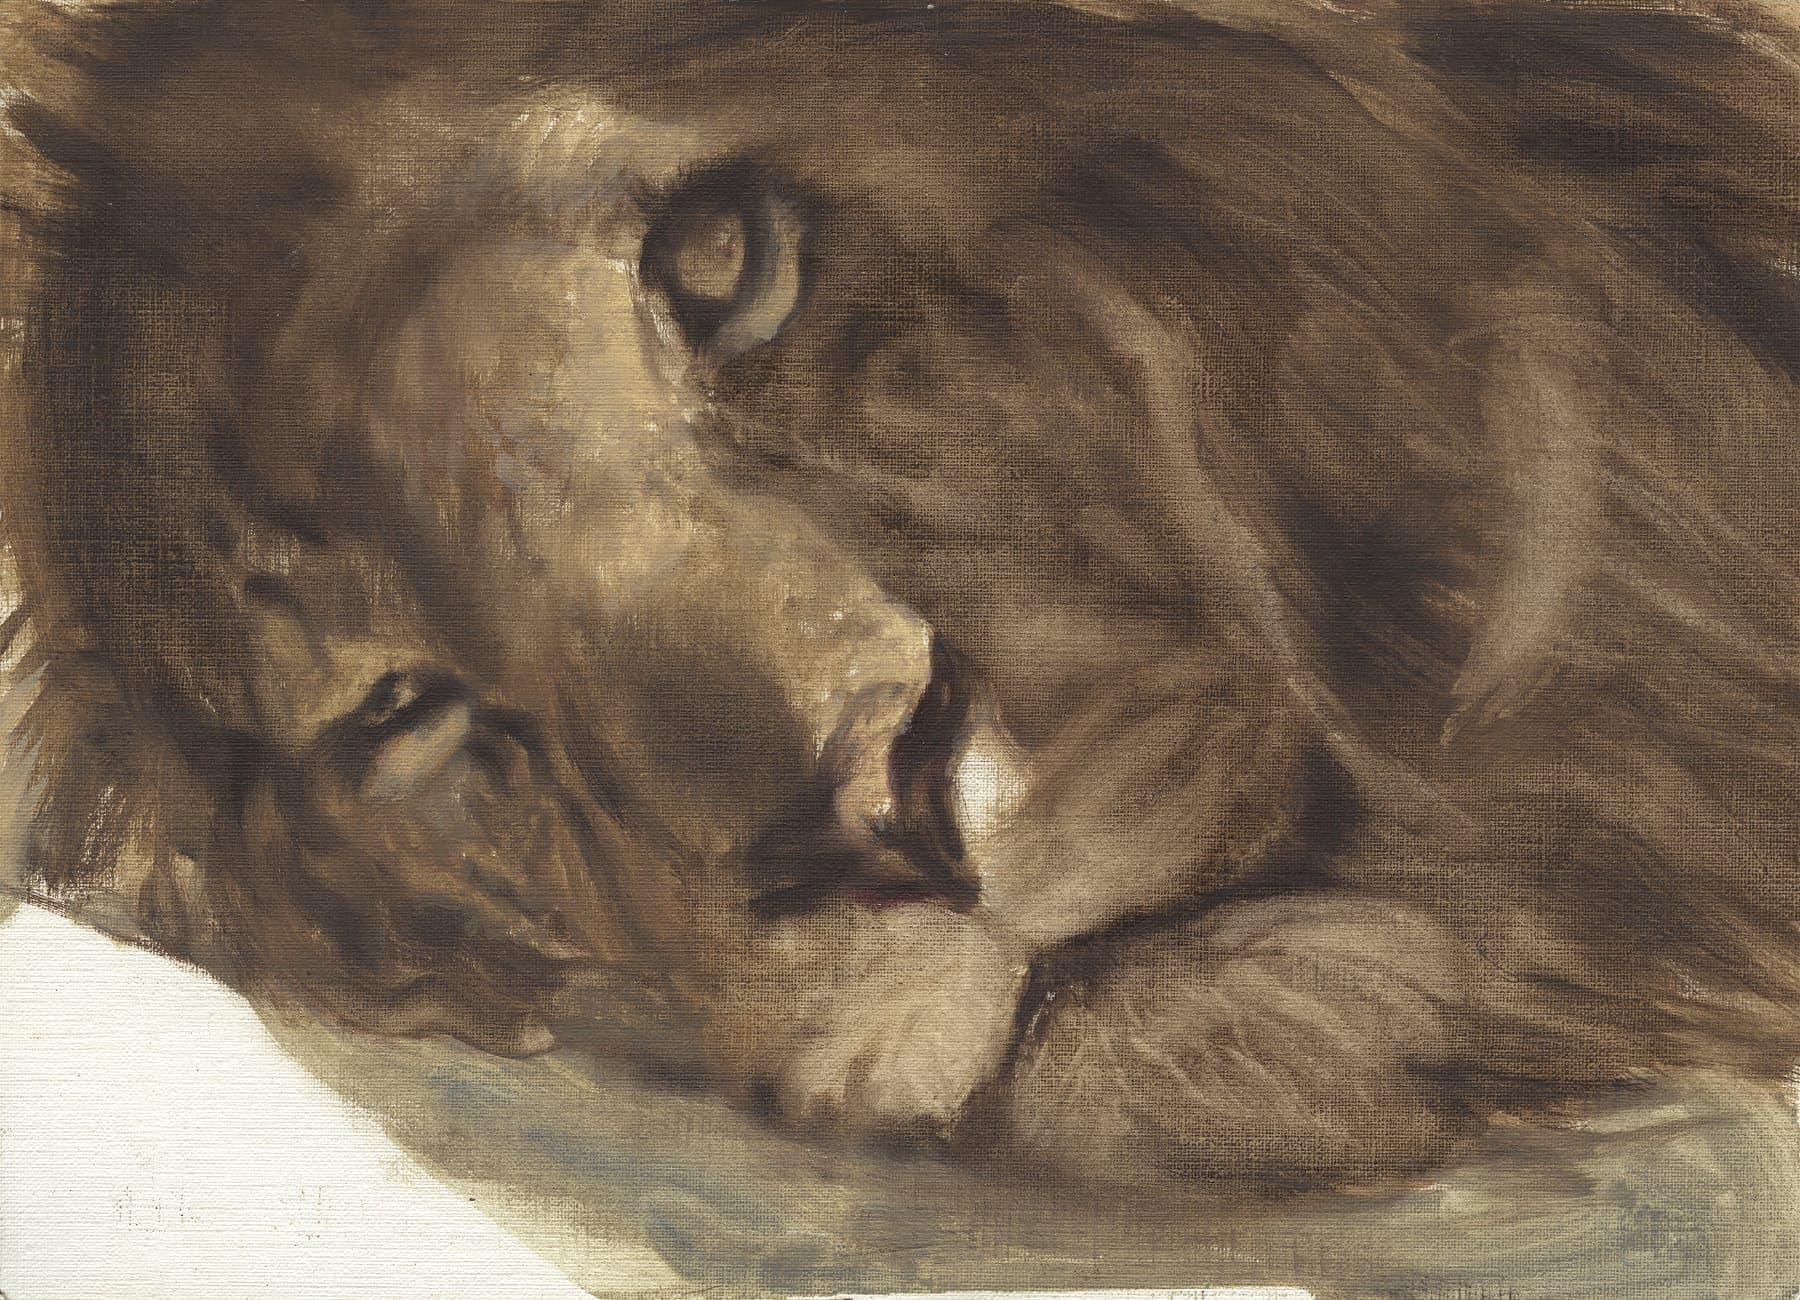 Lion  Painting